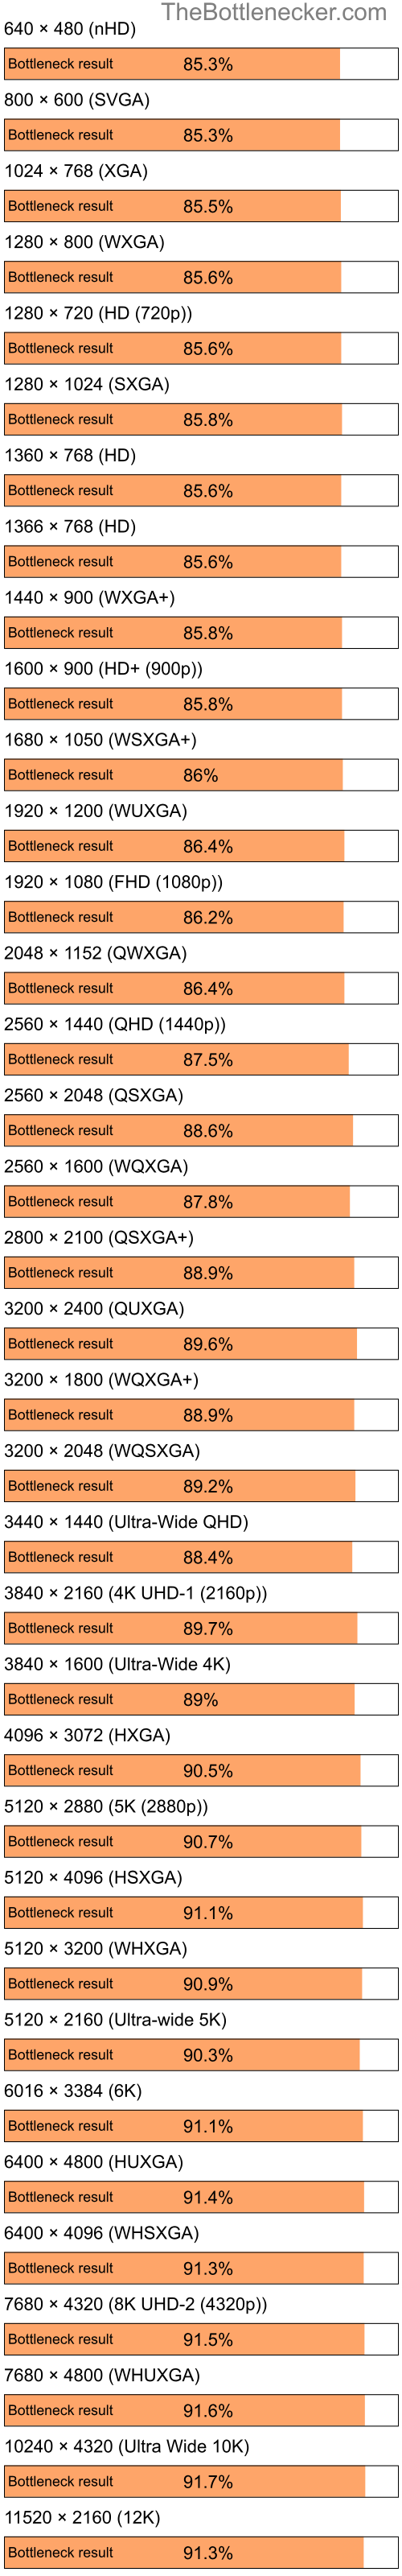 Bottleneck results by resolution for Intel Pentium 4 and NVIDIA GeForce4 MX Integrated GPU in General Tasks